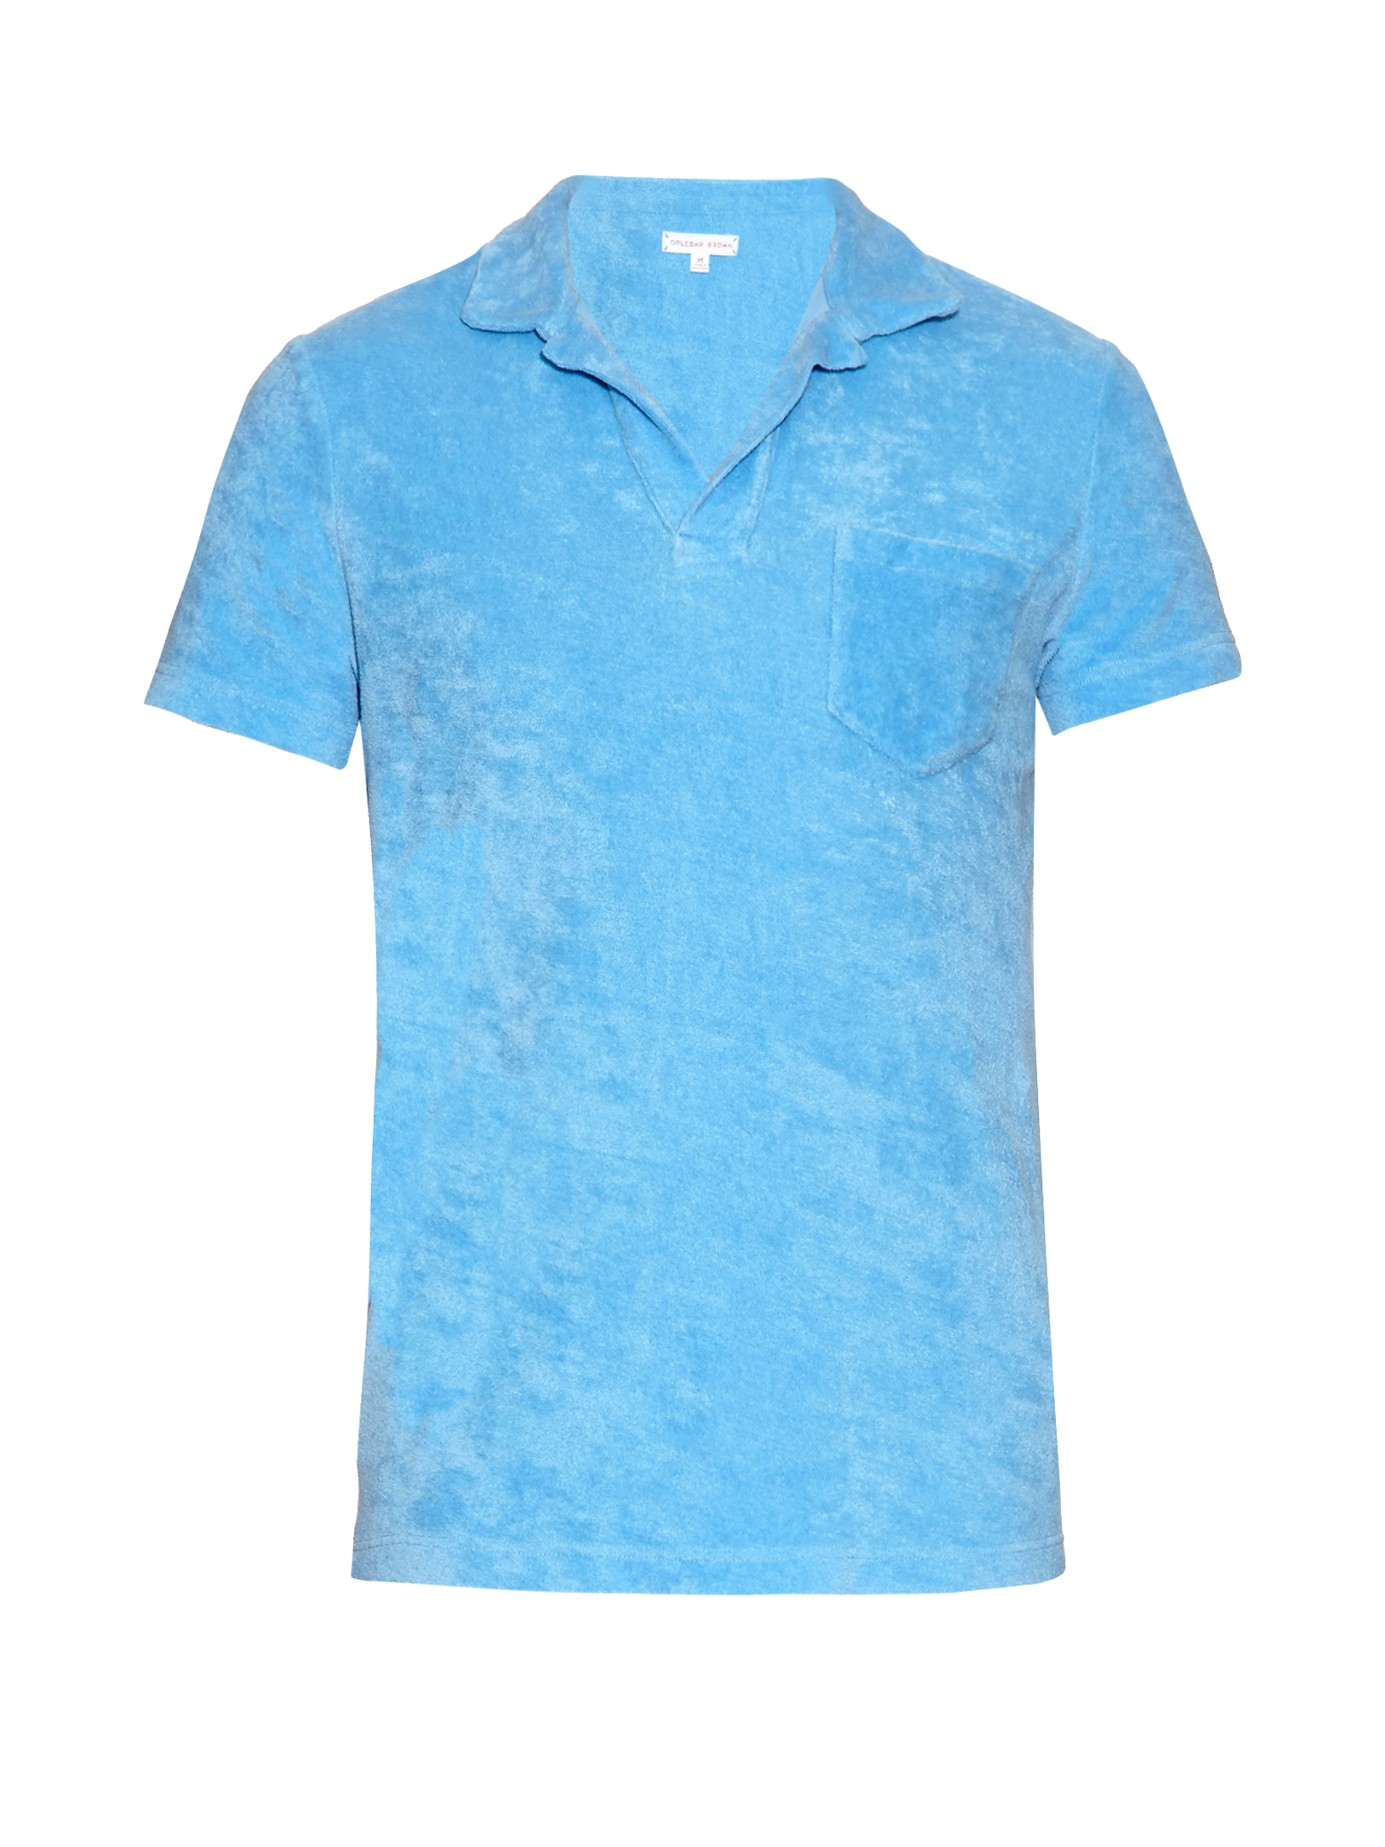 Orlebar brown Terry-towelling Cotton Polo Shirt in Blue for Men | Lyst